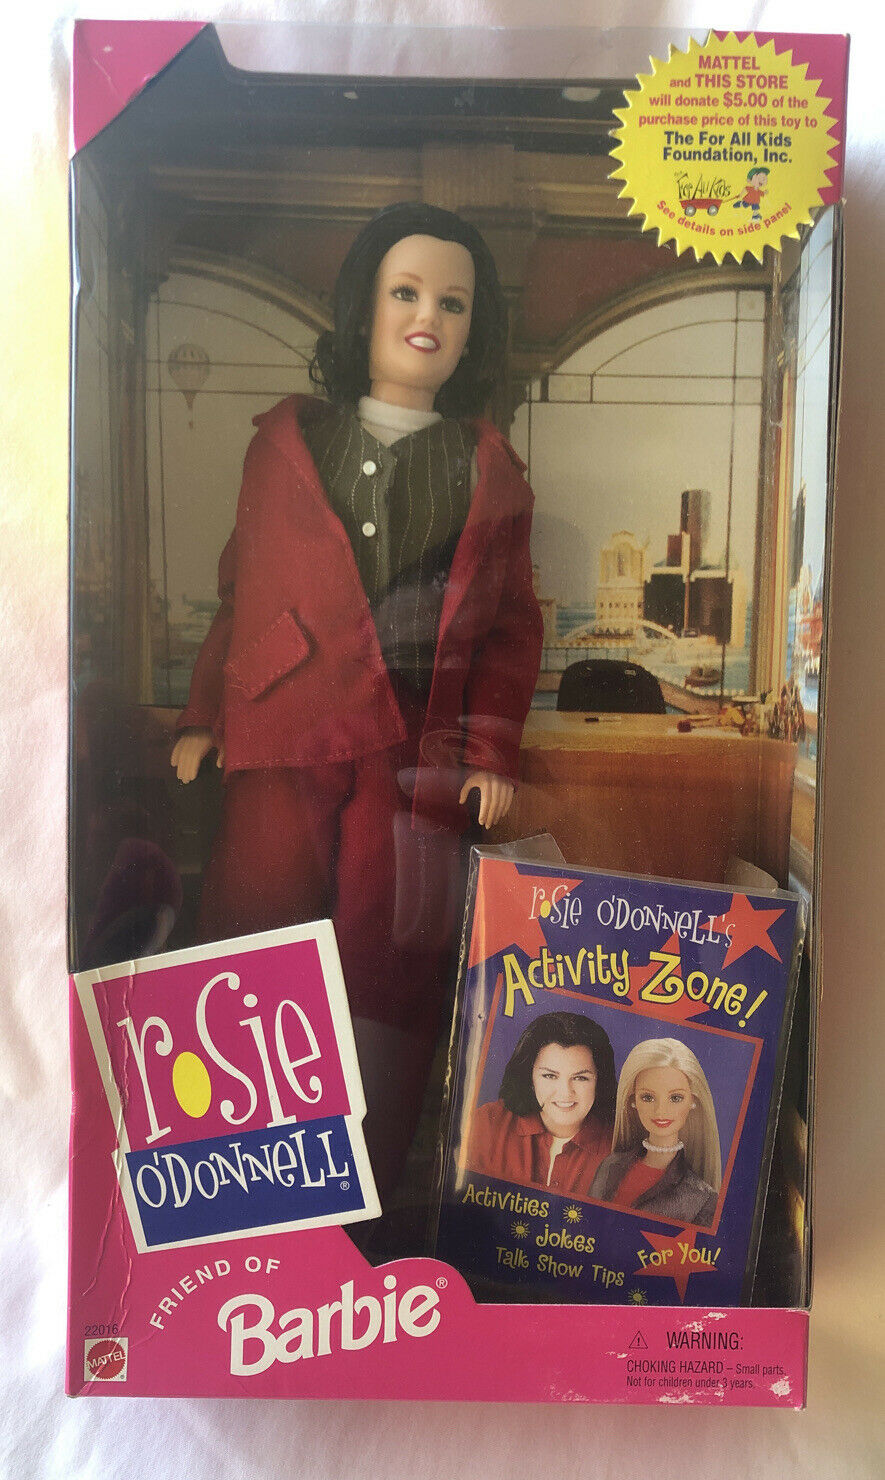 Rosie O'donnell Barbie Doll